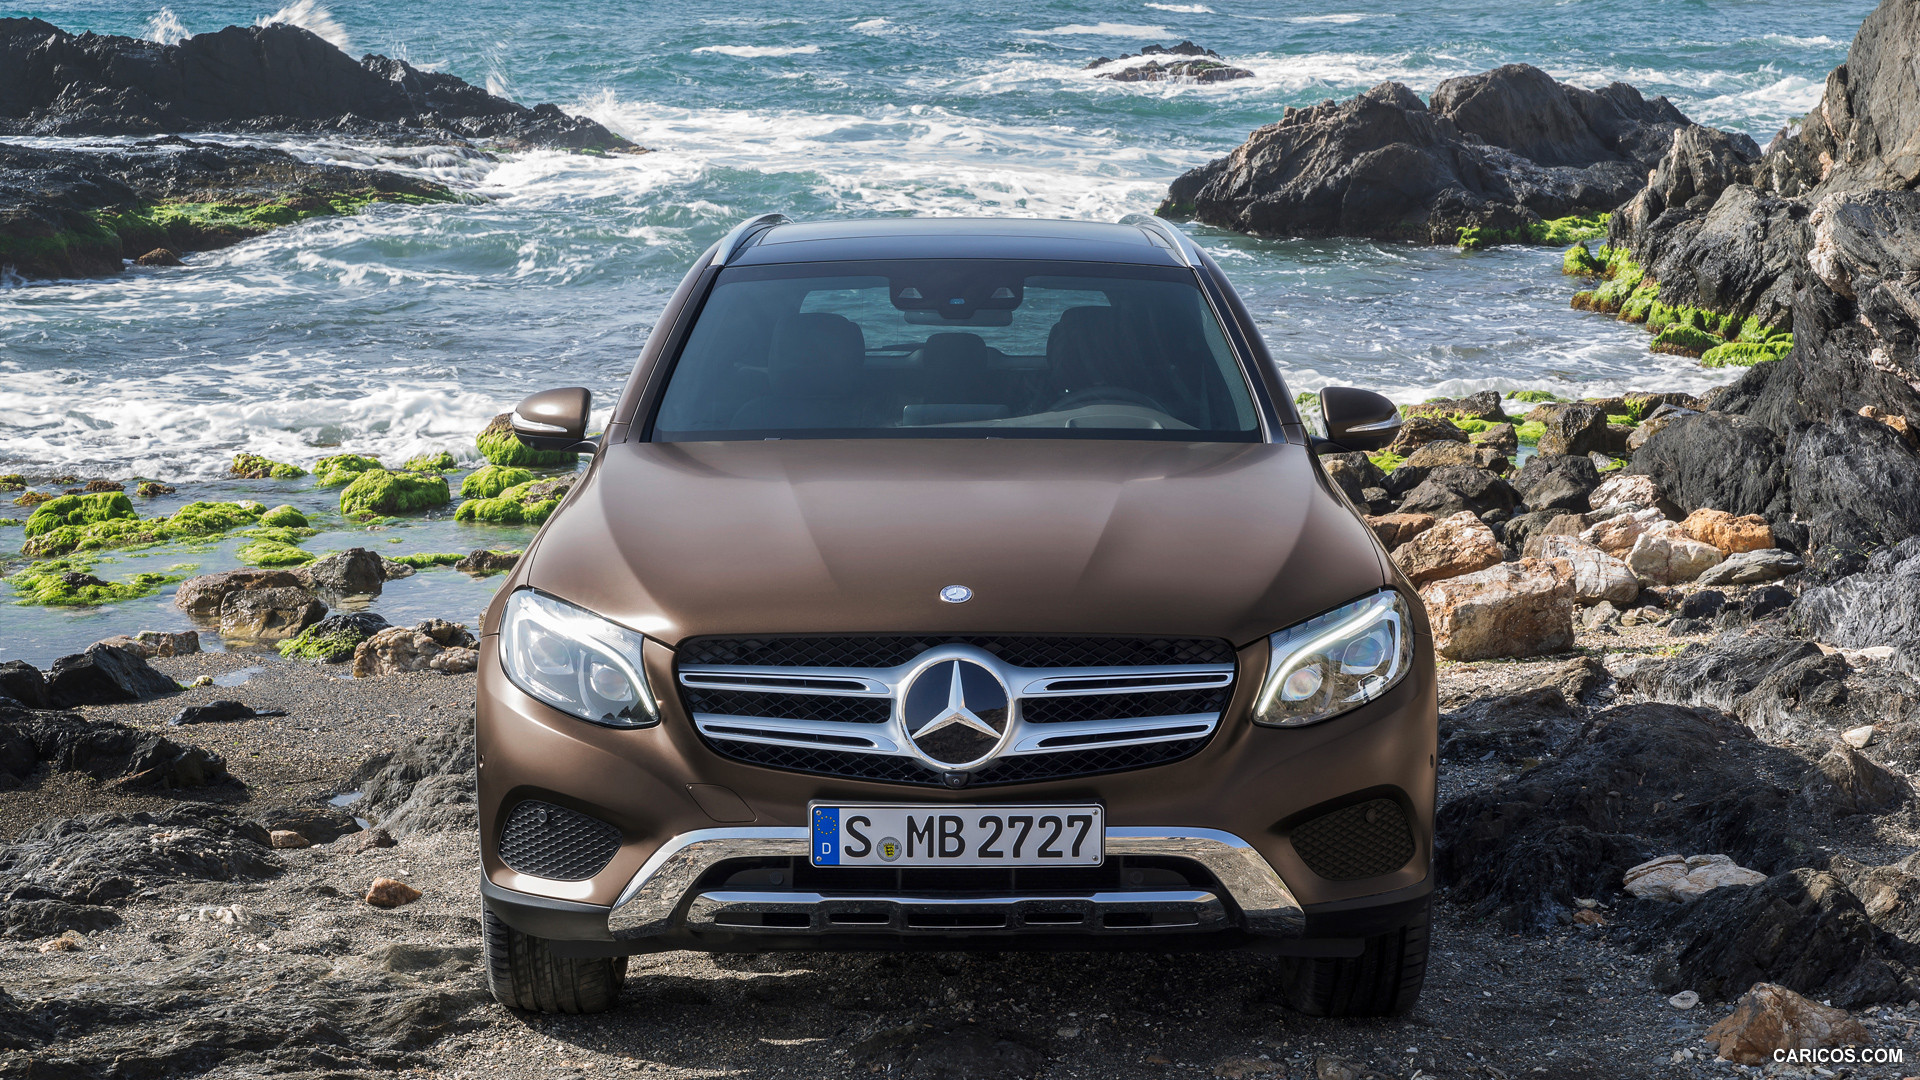 2016 Mercedes-Benz GLC-Class GLC 250d 4MATIC (CITRINE BROWN MAGNO, Offroad Line) - Front, #61 of 254